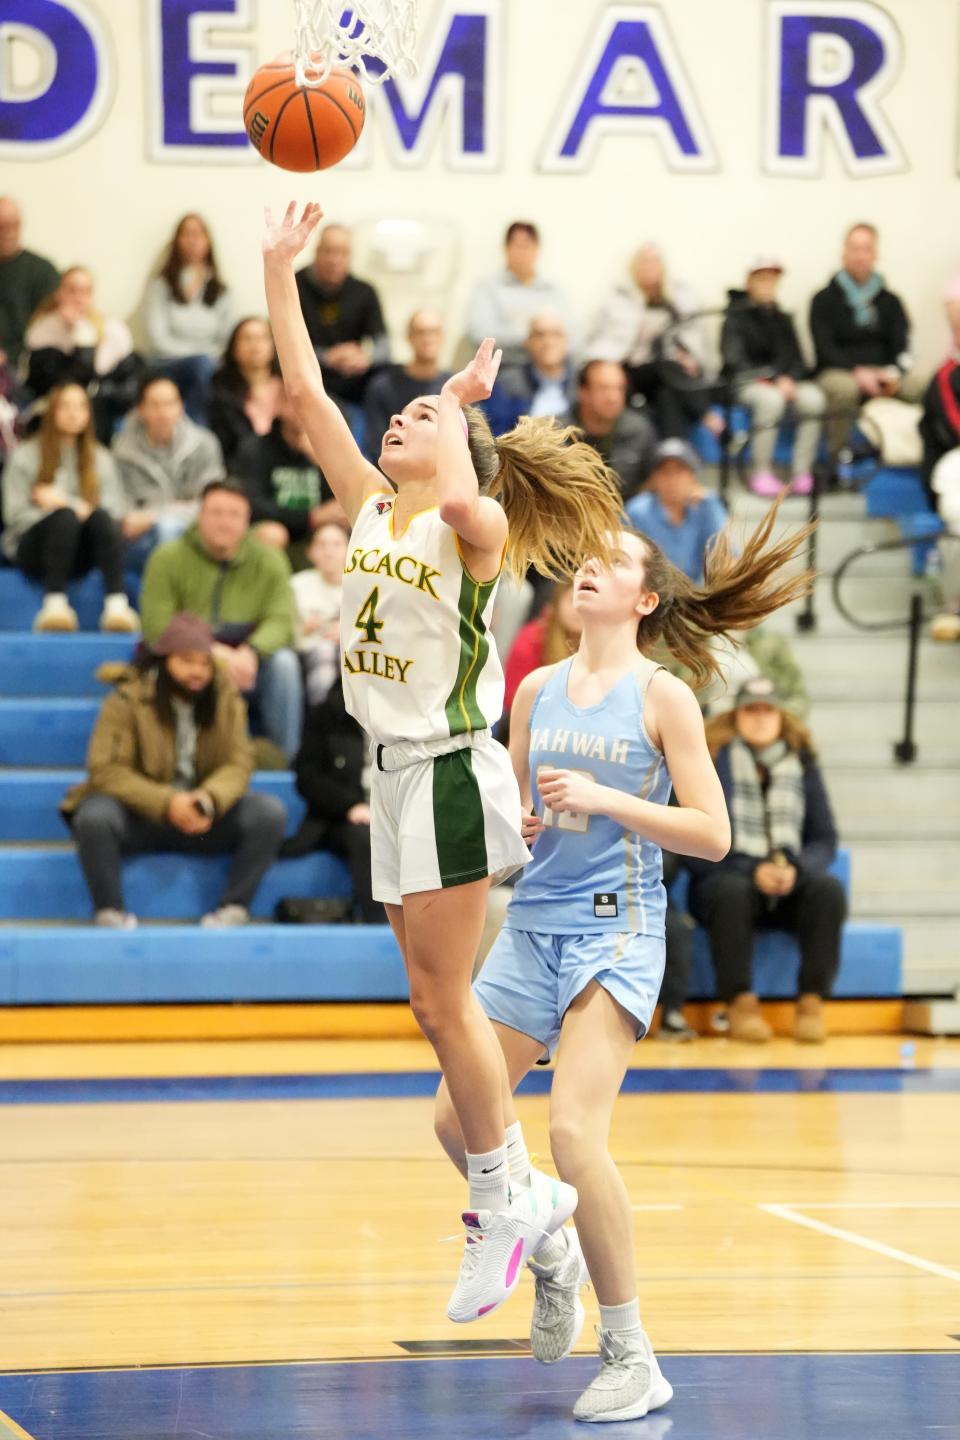 Pascack Valley vs. Mahwah in the Girls Basketball Bergen County Tournament quarterfinals at Northern Valley Regional High School at Demarest on Saturday, February 4, 2023. PV #4 Celina Bussanich drive to the basket. 